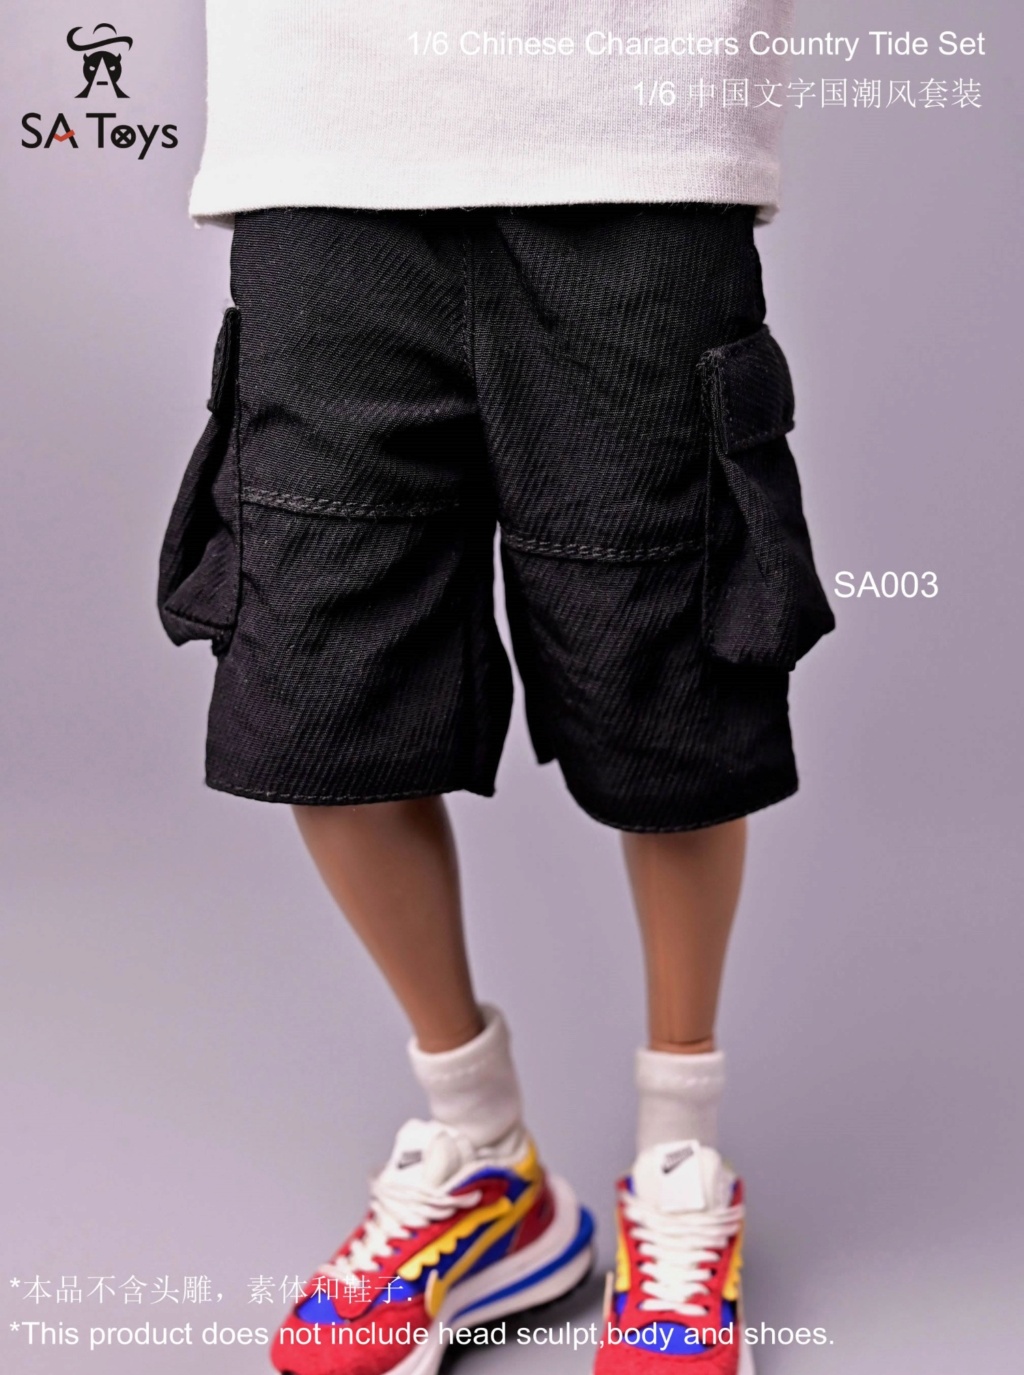 newproduct - NEW PRODUCT: SA Toys：1/6 Multi color Chinese style men's clothing 11075811